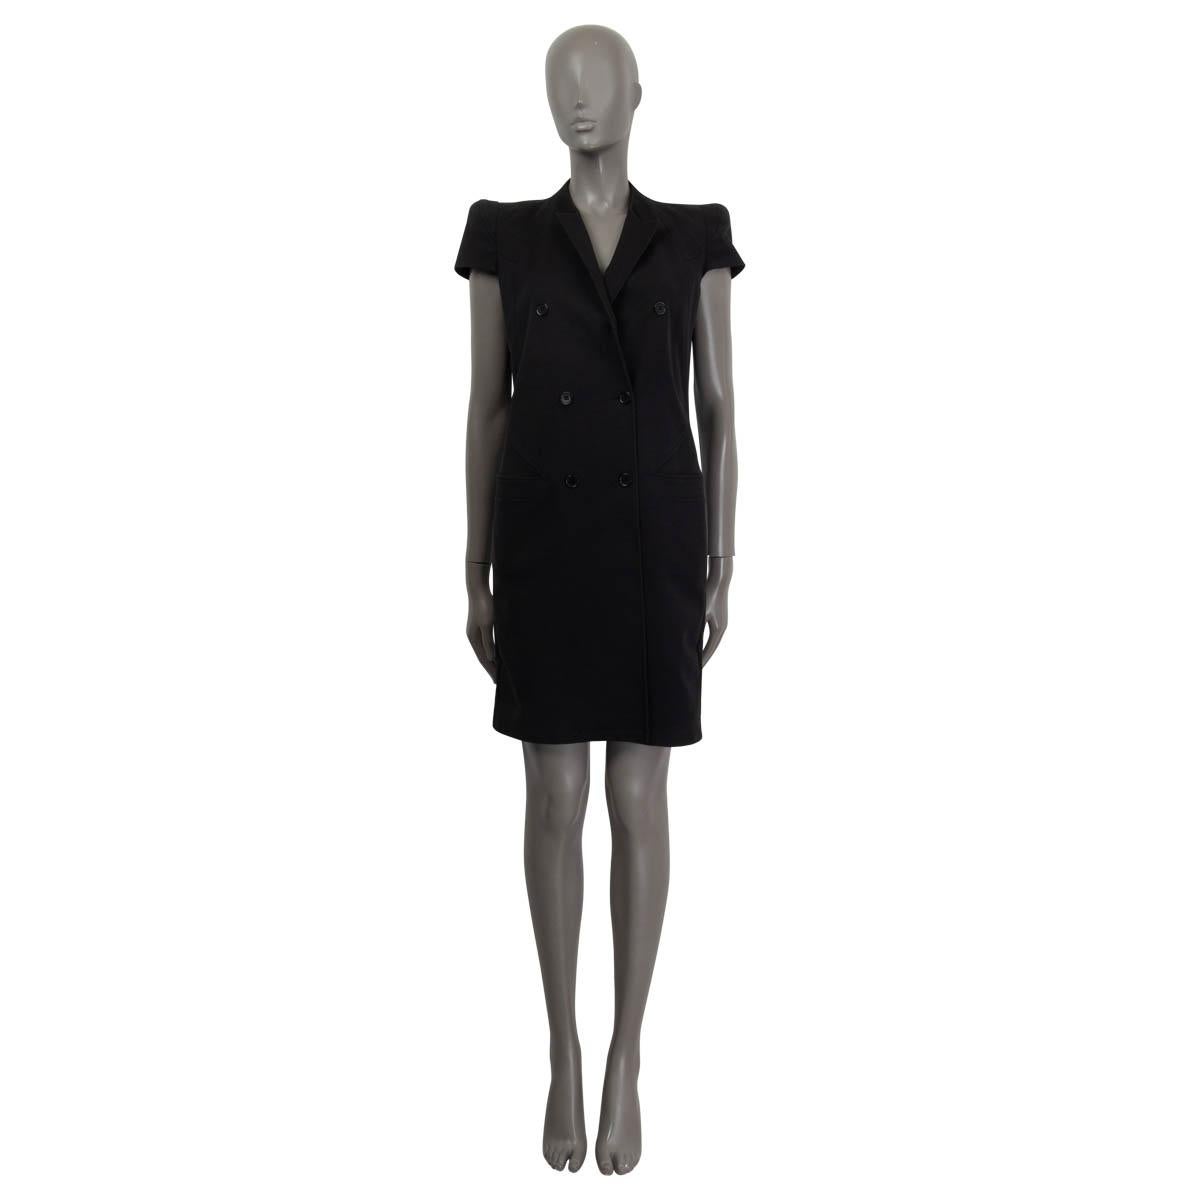 100% authentic Givenchy double breasted short sleeve dress in black cotton (97%) and elastane (3%). Features padded shoulders and two slit pockets on the front. Opens with two black buttons on the front. Lined in black acetate (65%) and polyamide